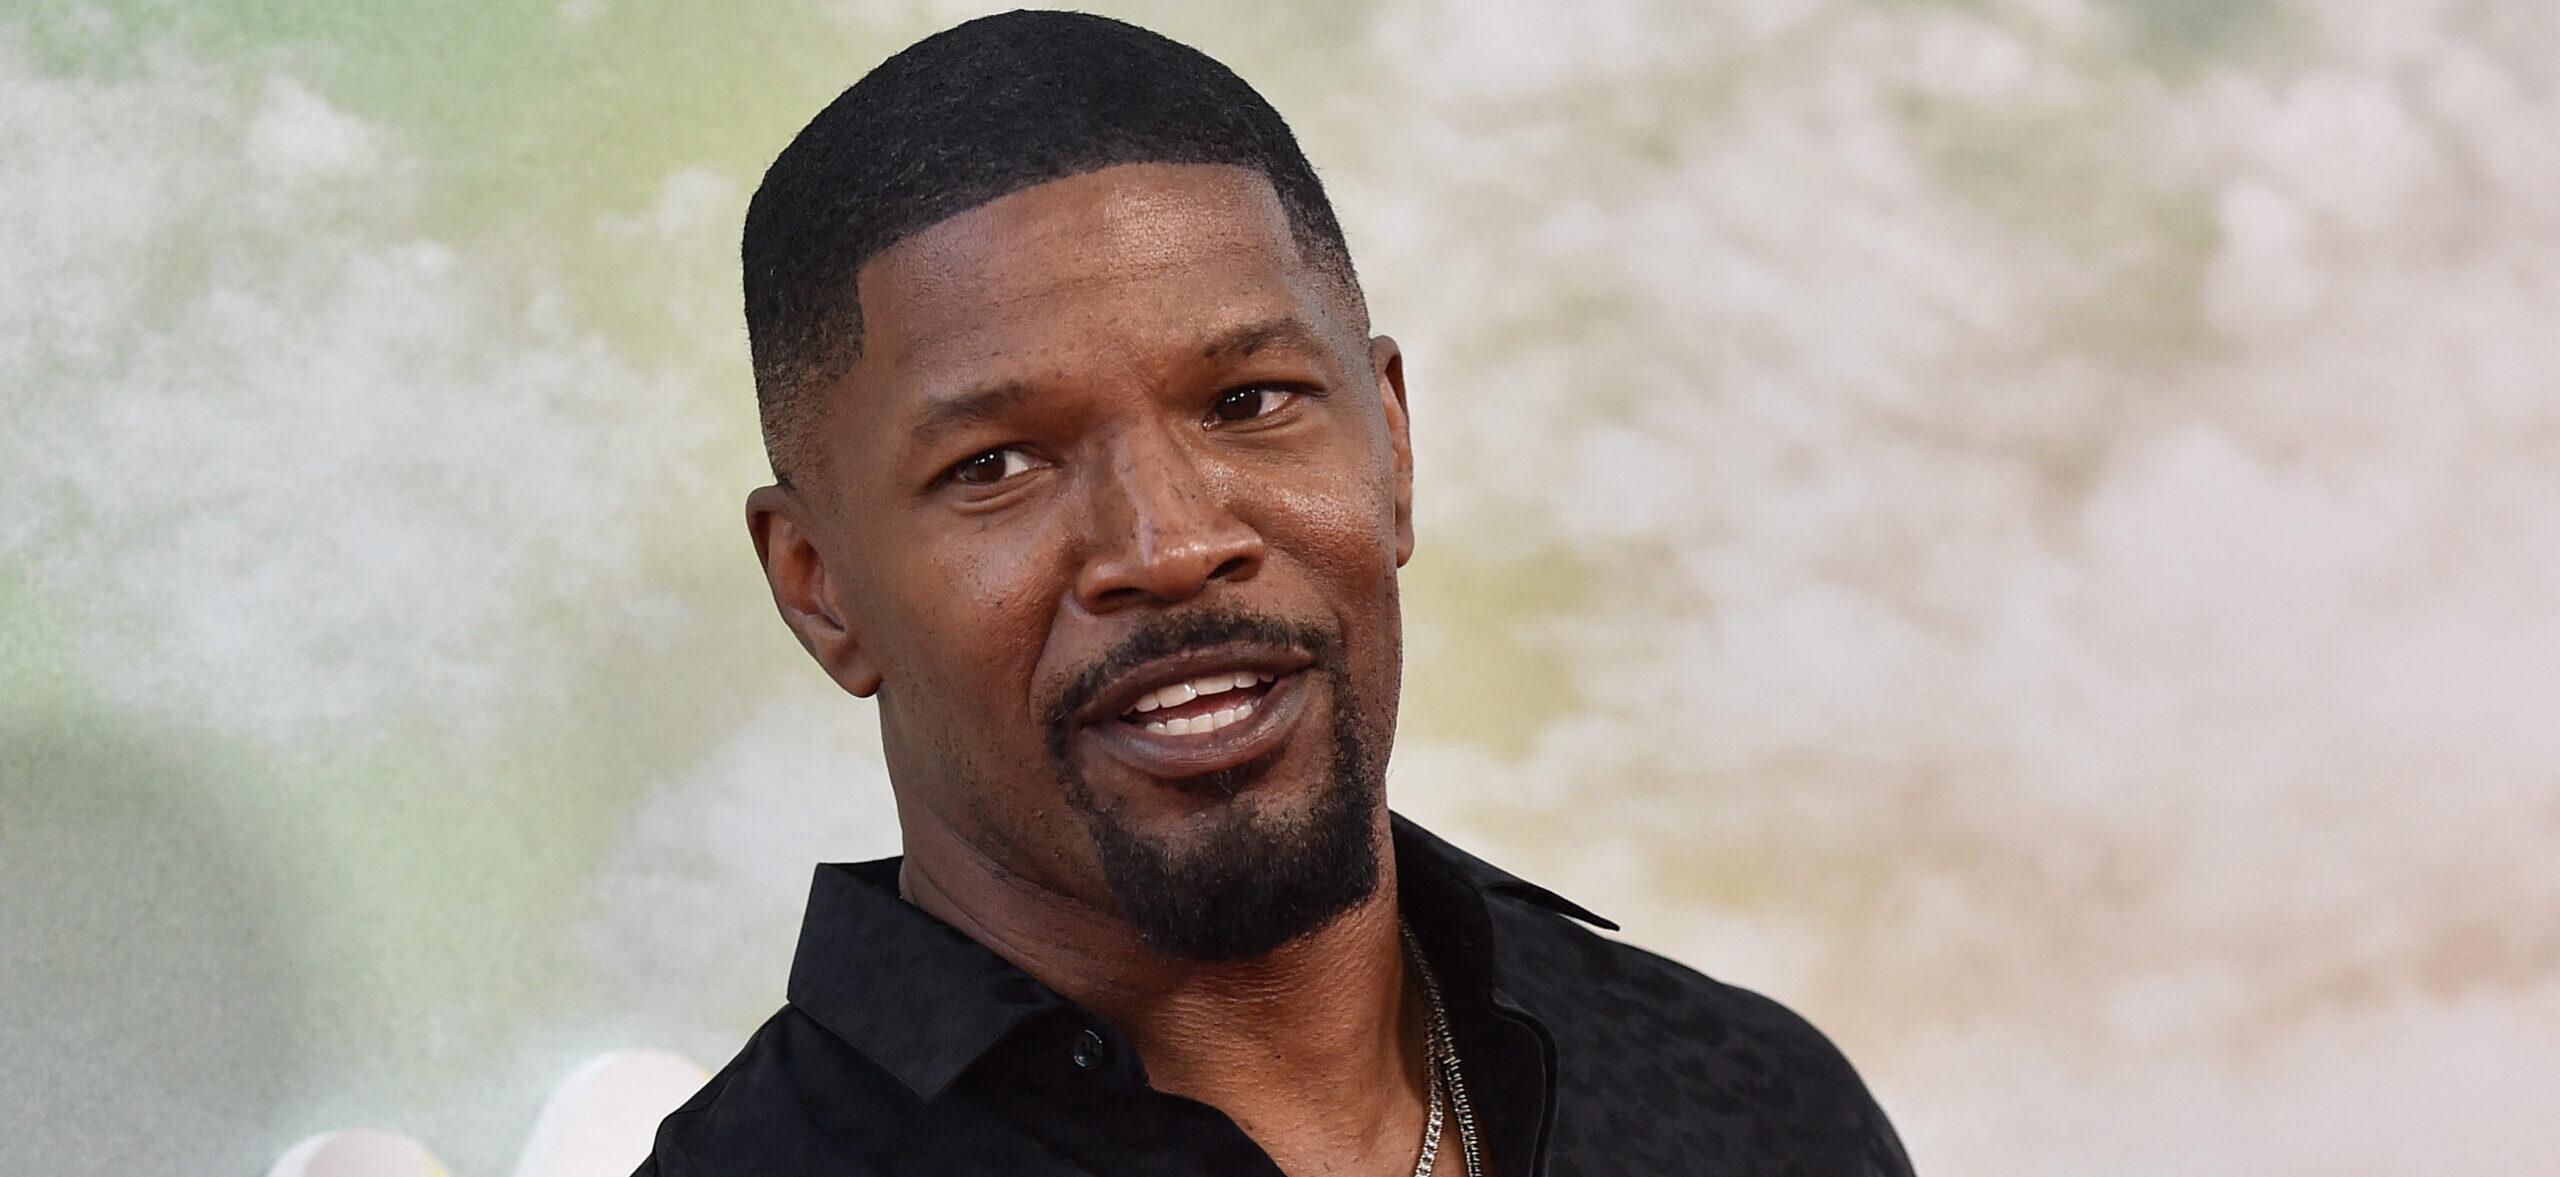 Jamie Foxx’s Celebrity Friends Shower Him With Kind Words After Emotional Video About His Health